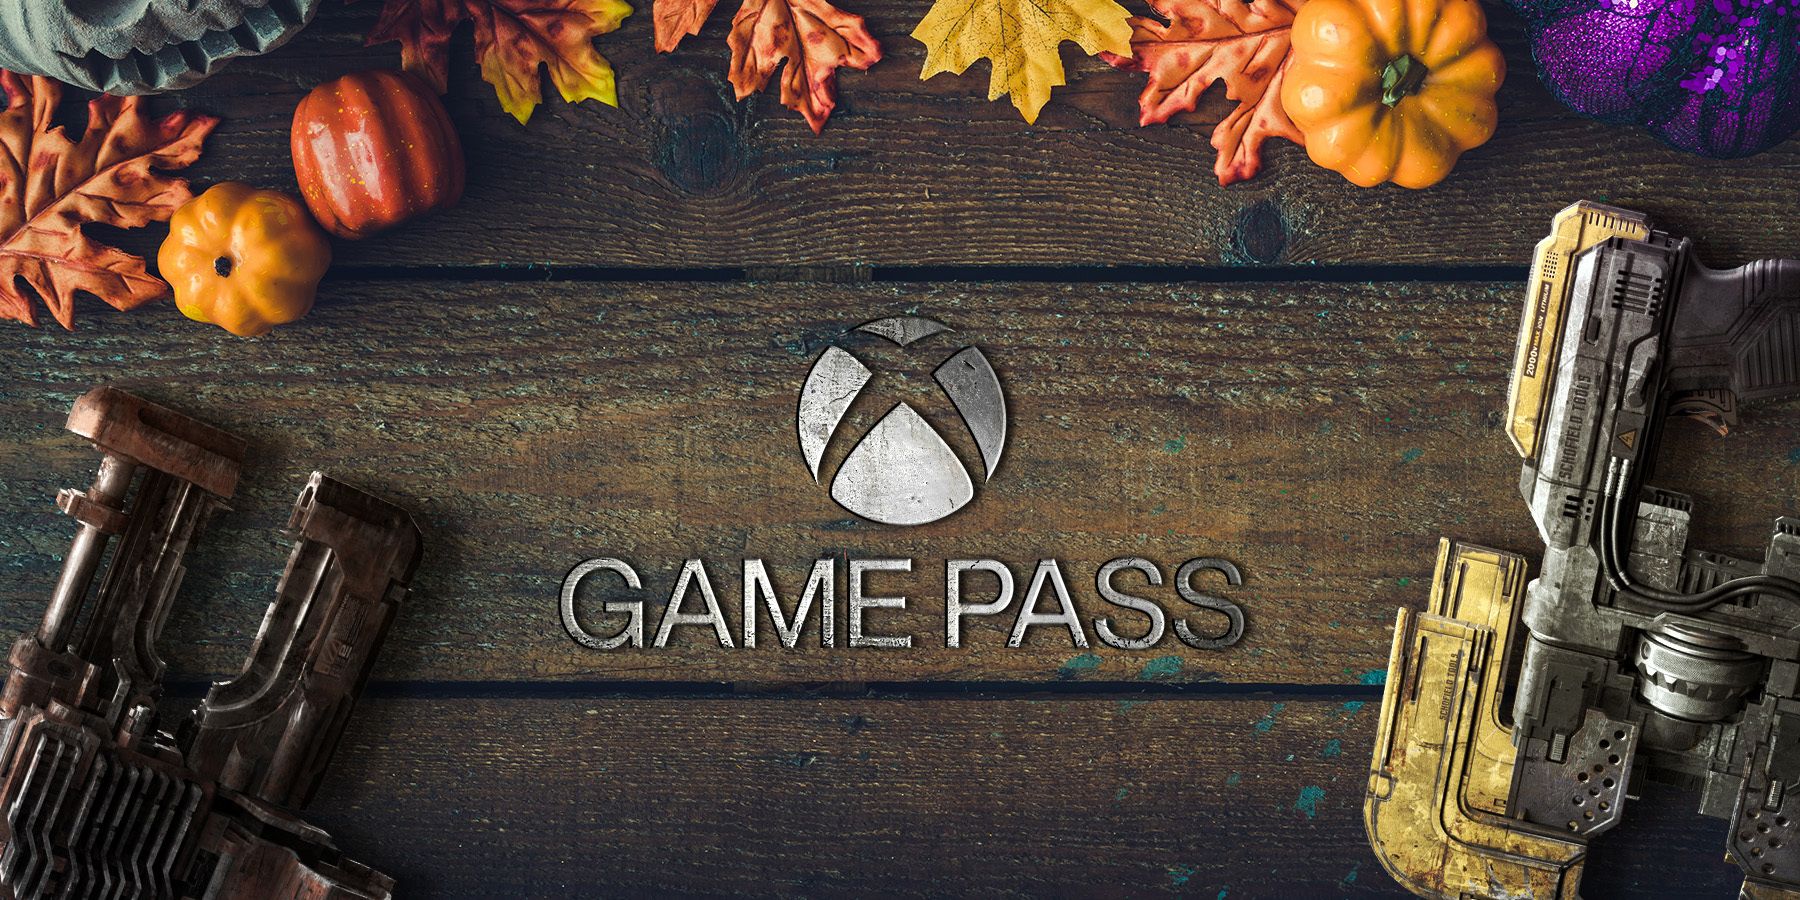 Xbox Game Pass confirms all the games coming to the service later this  month, including the Dead Space remake - just in time for Halloween.